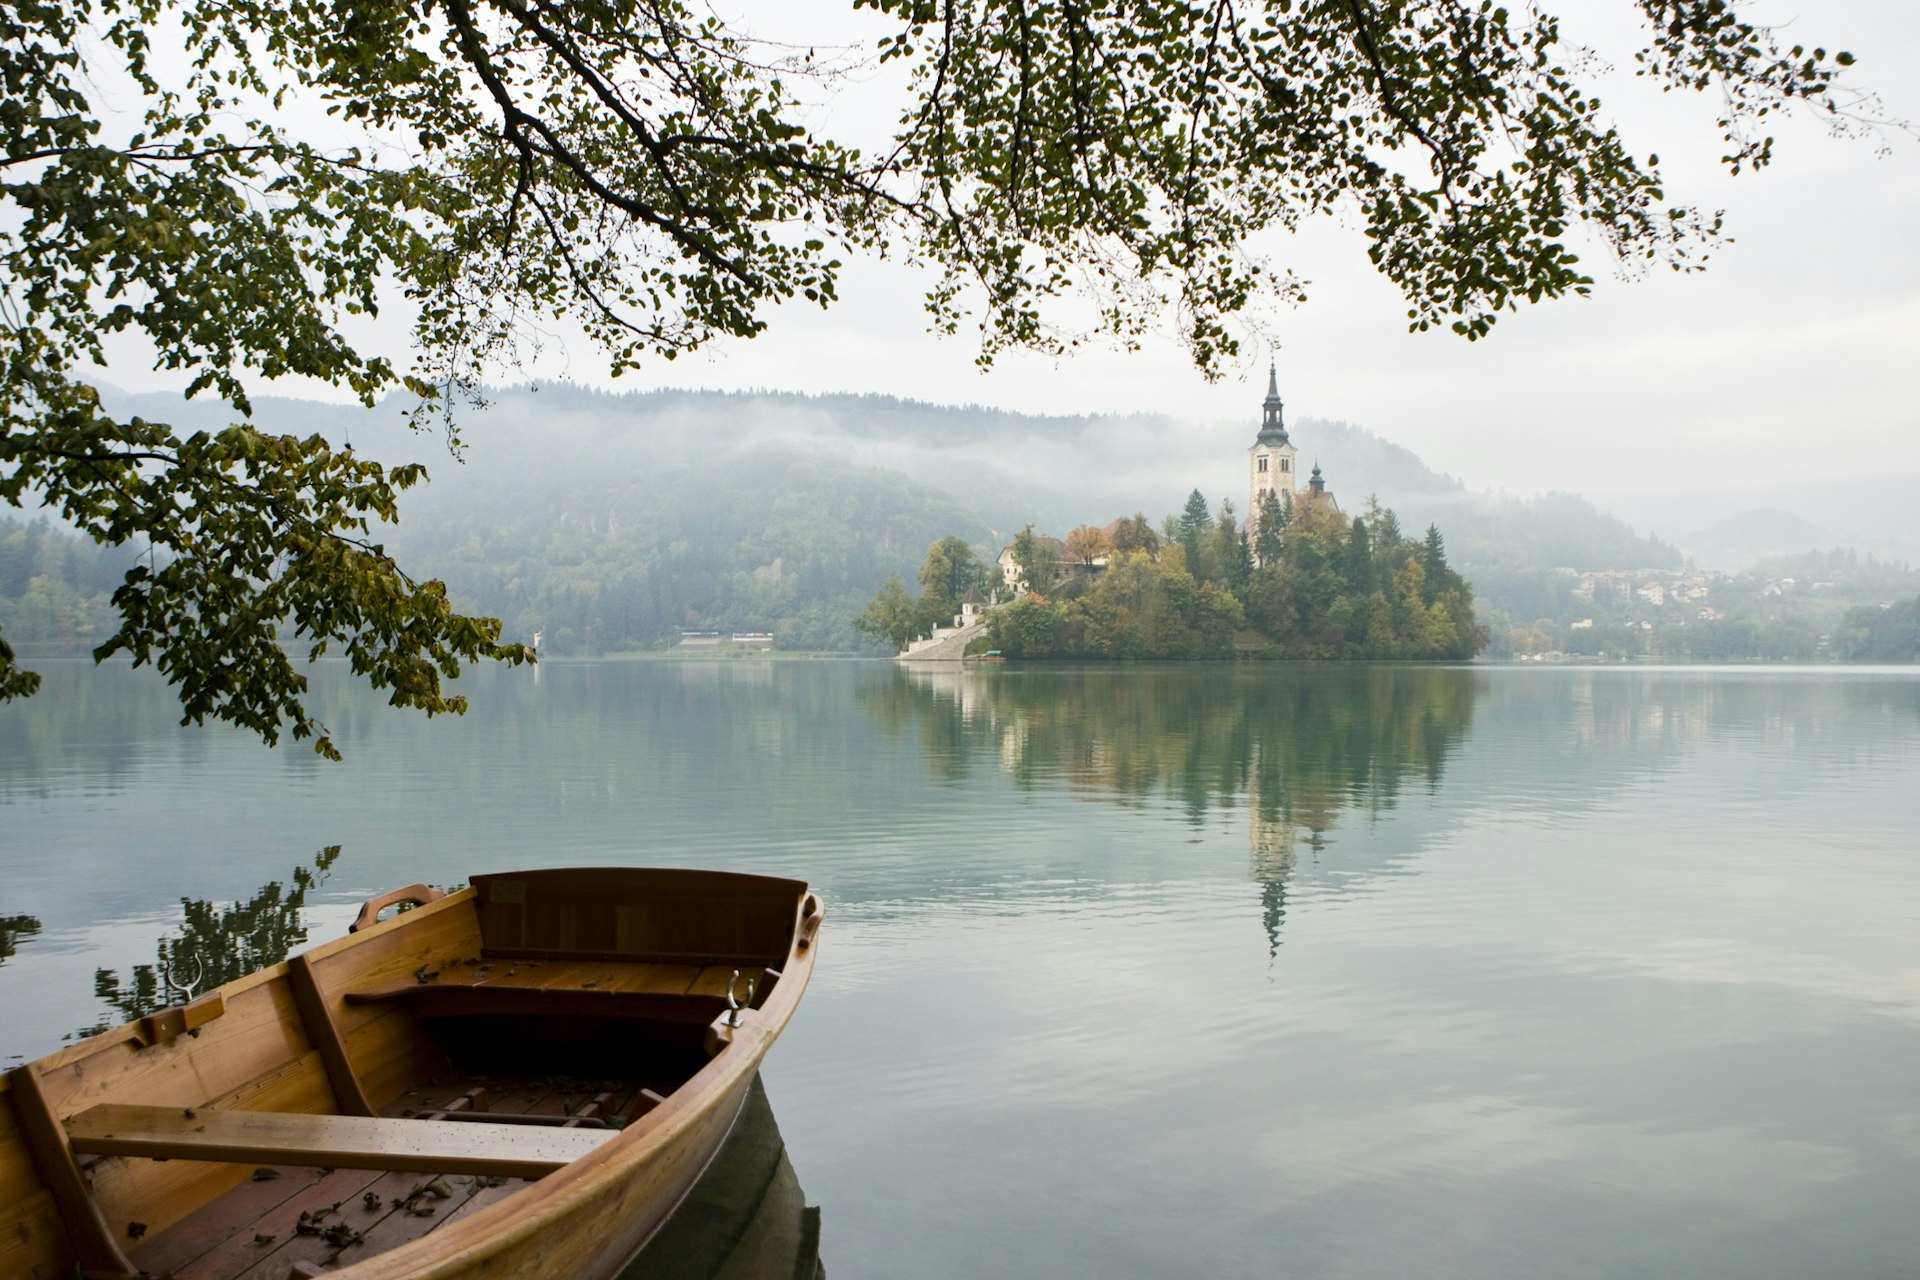 Colorful rowing boats line up on the shore of Lake Bled, with the surrounding trees in beautiful fall colors and Bled Island and Church of Mary the Queen in the background.